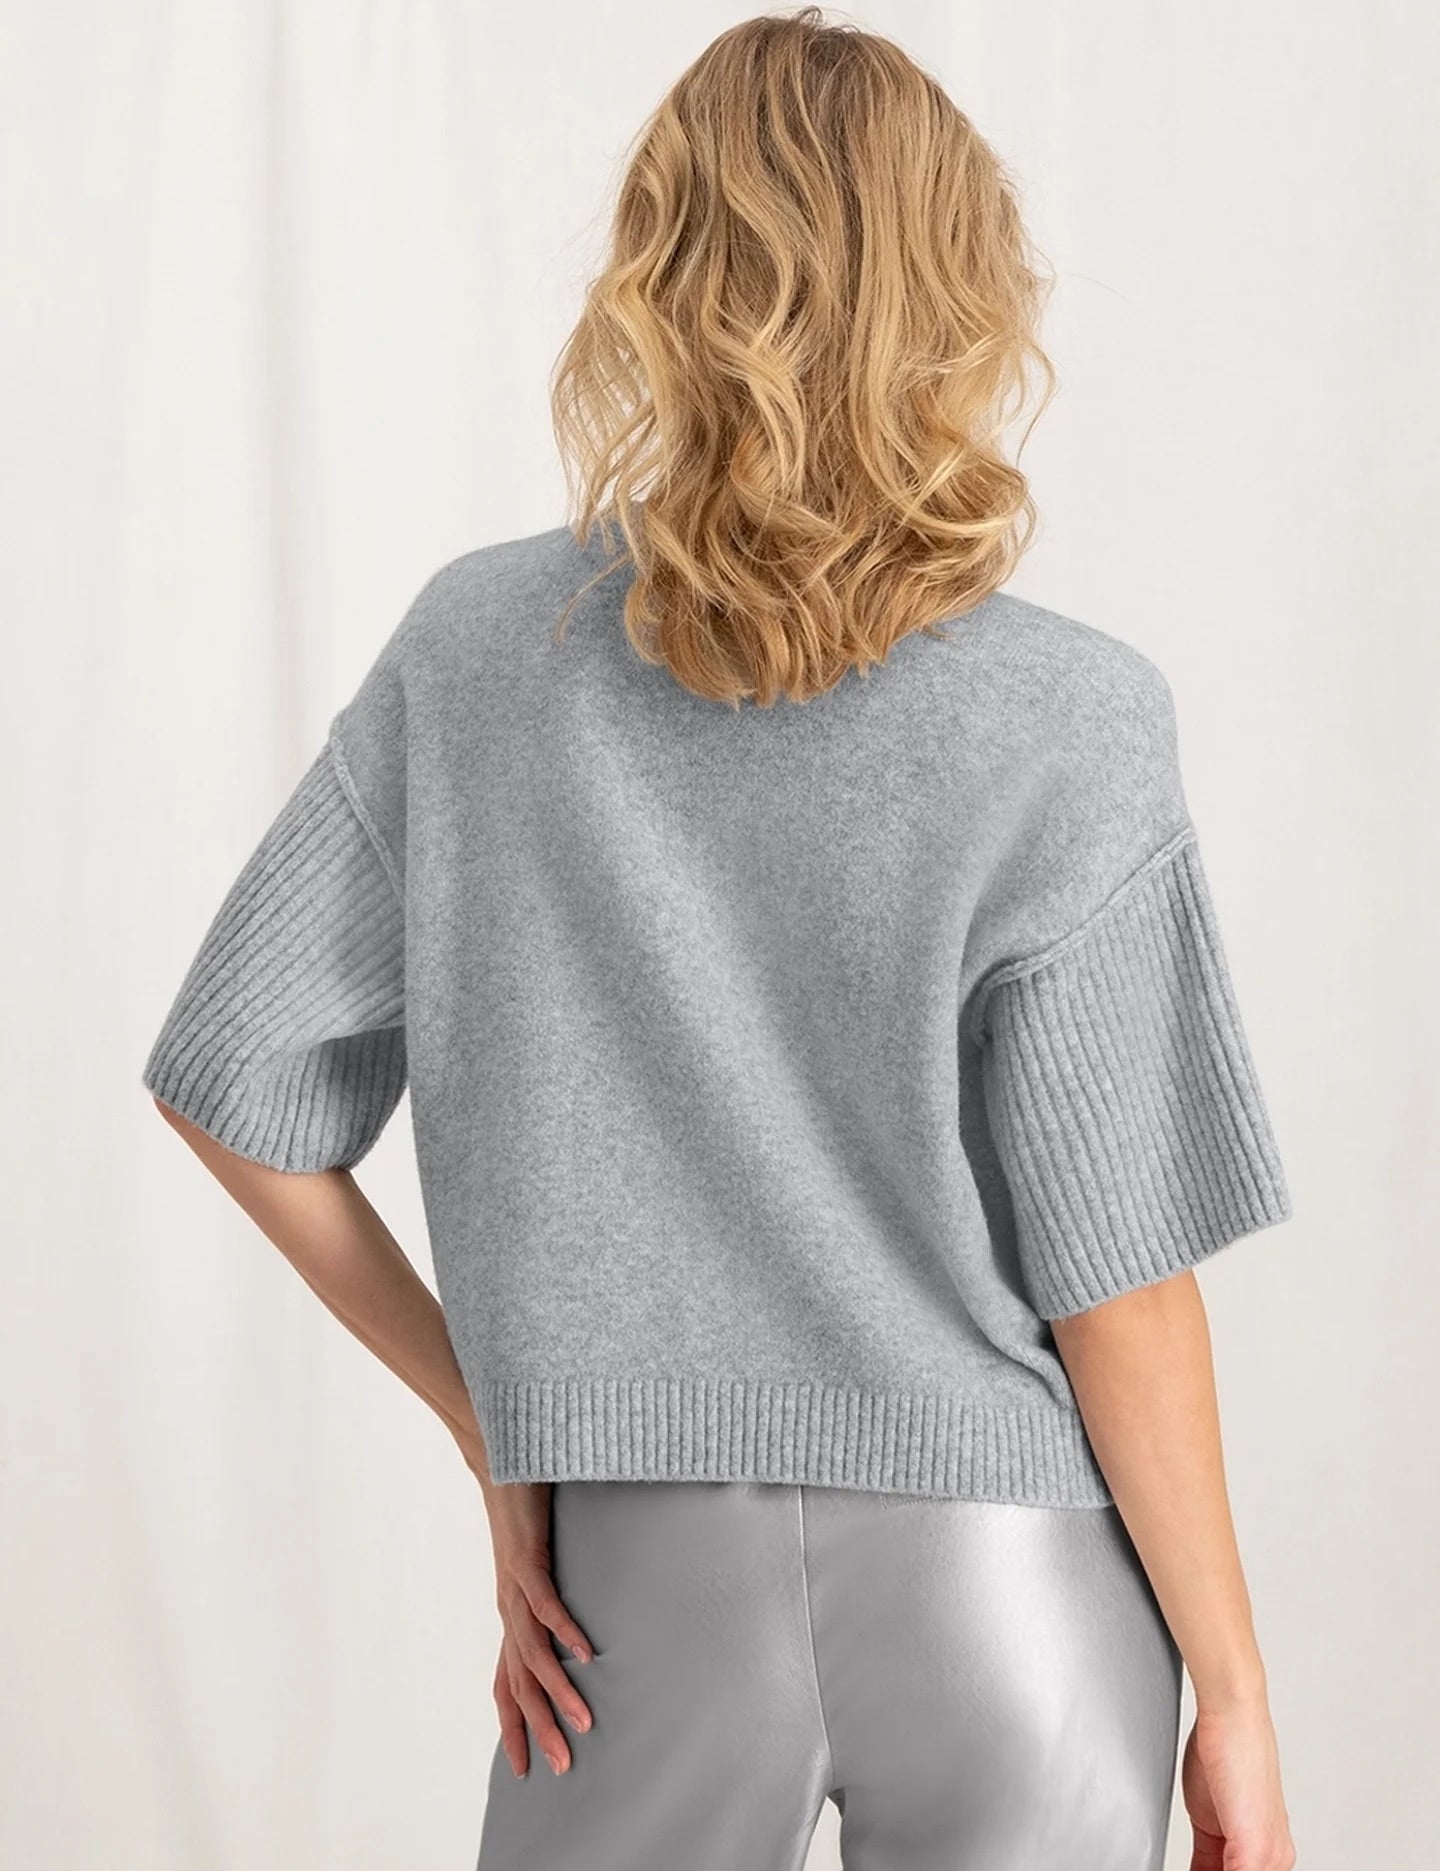 sweater-with-boatneck-wide-half-long-sleeves-in-boxy-fit-grey-melange_d5629fa3-aa76-4471-a434-92bd7524724e_2880x_jpg.jpg